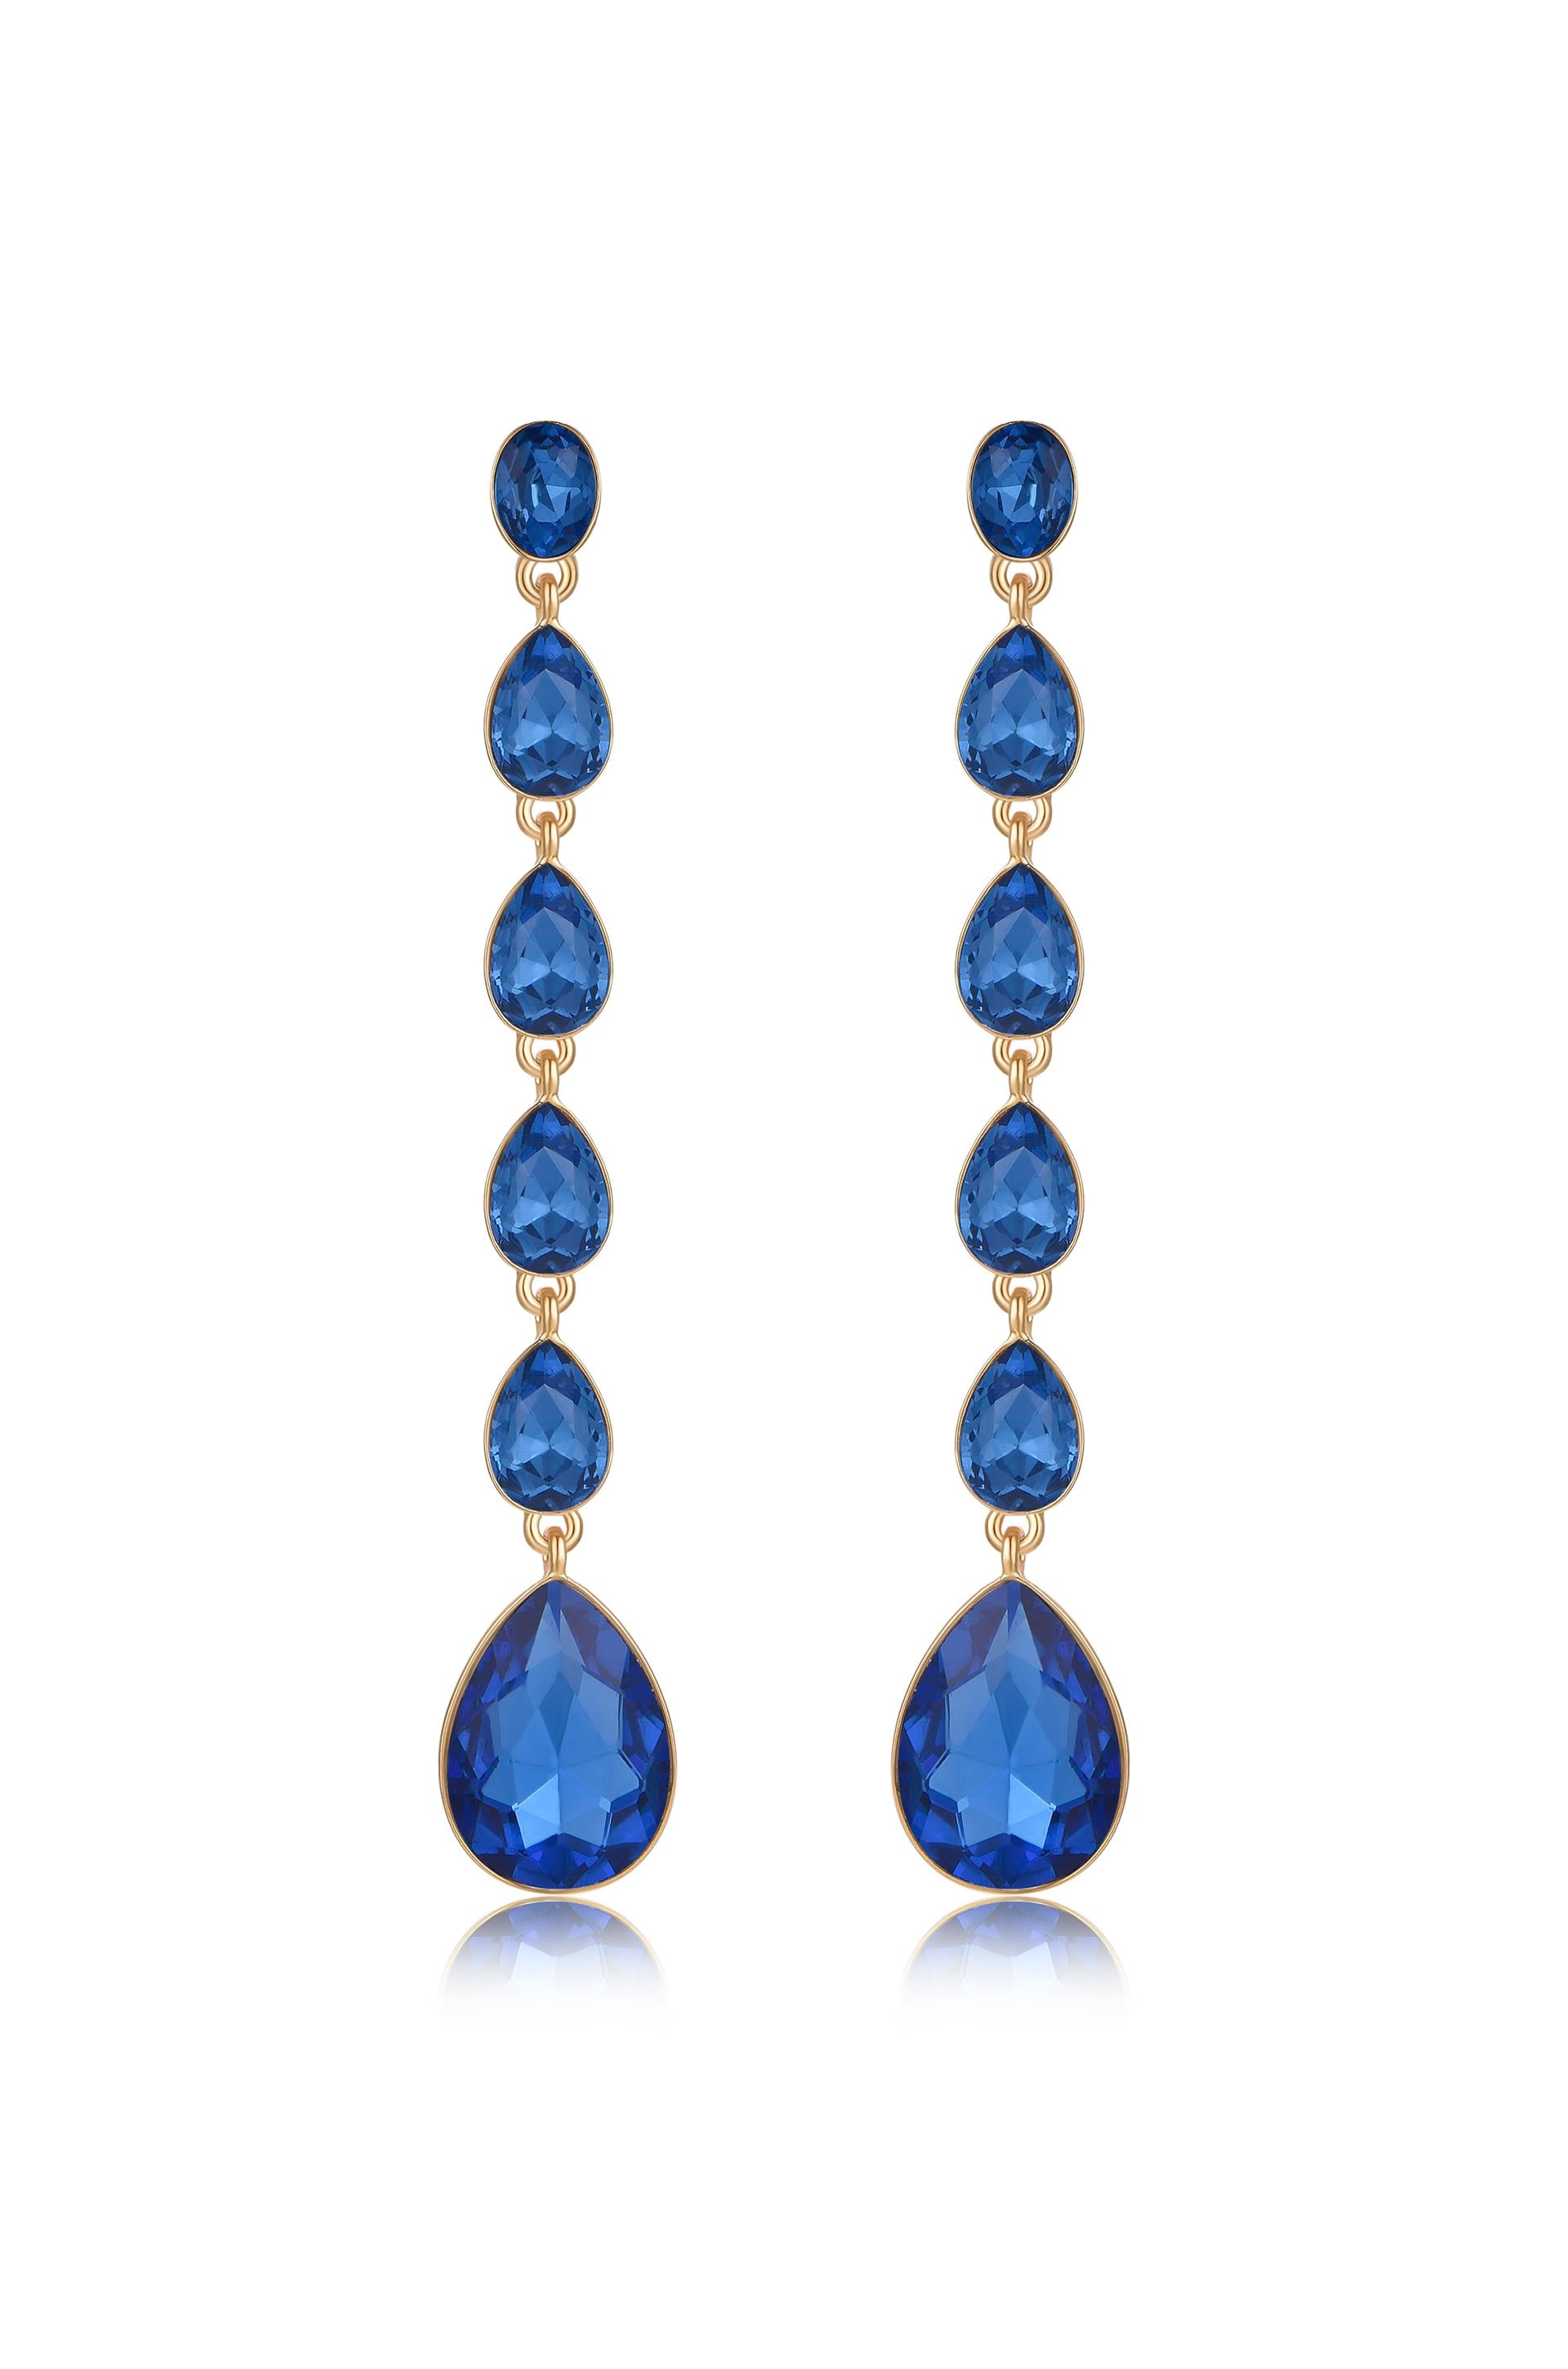 Crystallized Drop 18k Gold Plated Earrings in saphire